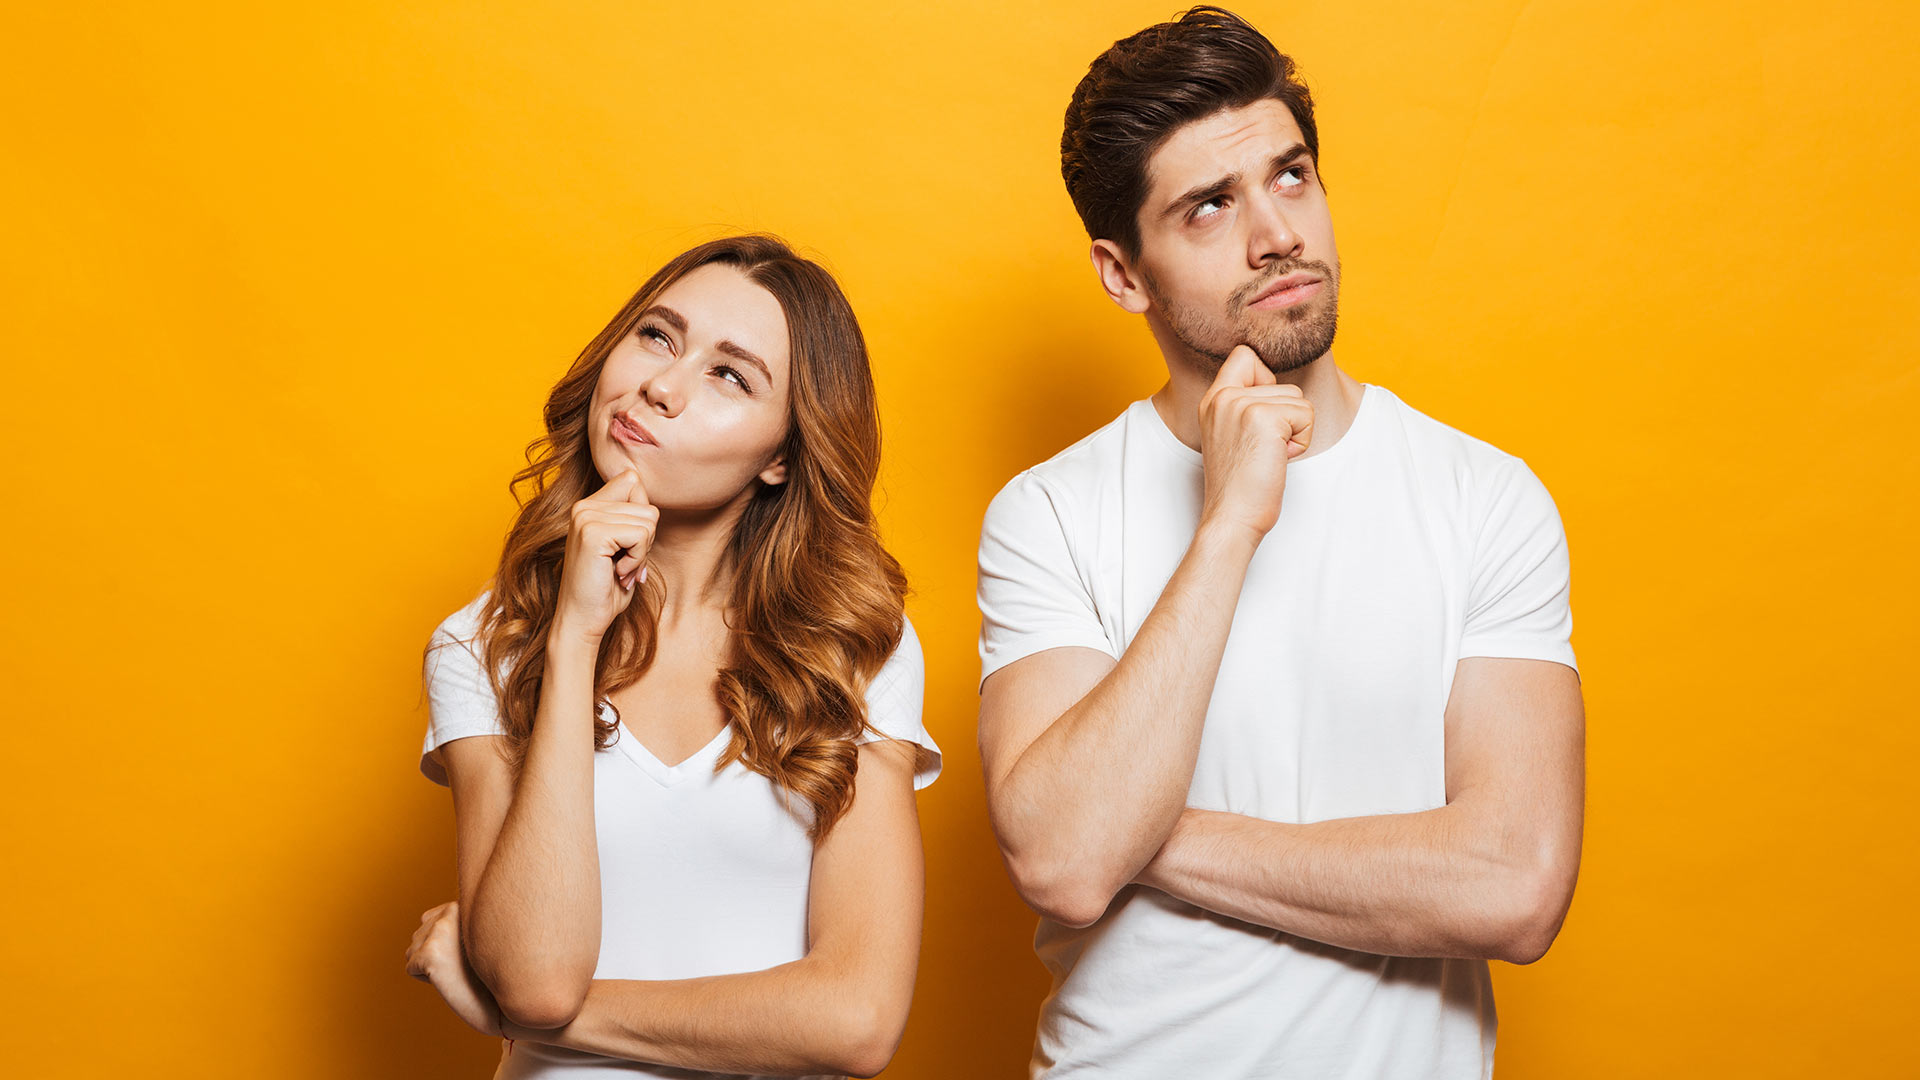 Brunette man and woman in white t-shirts rubbing their chins while deep in thought. Orange background behind them.